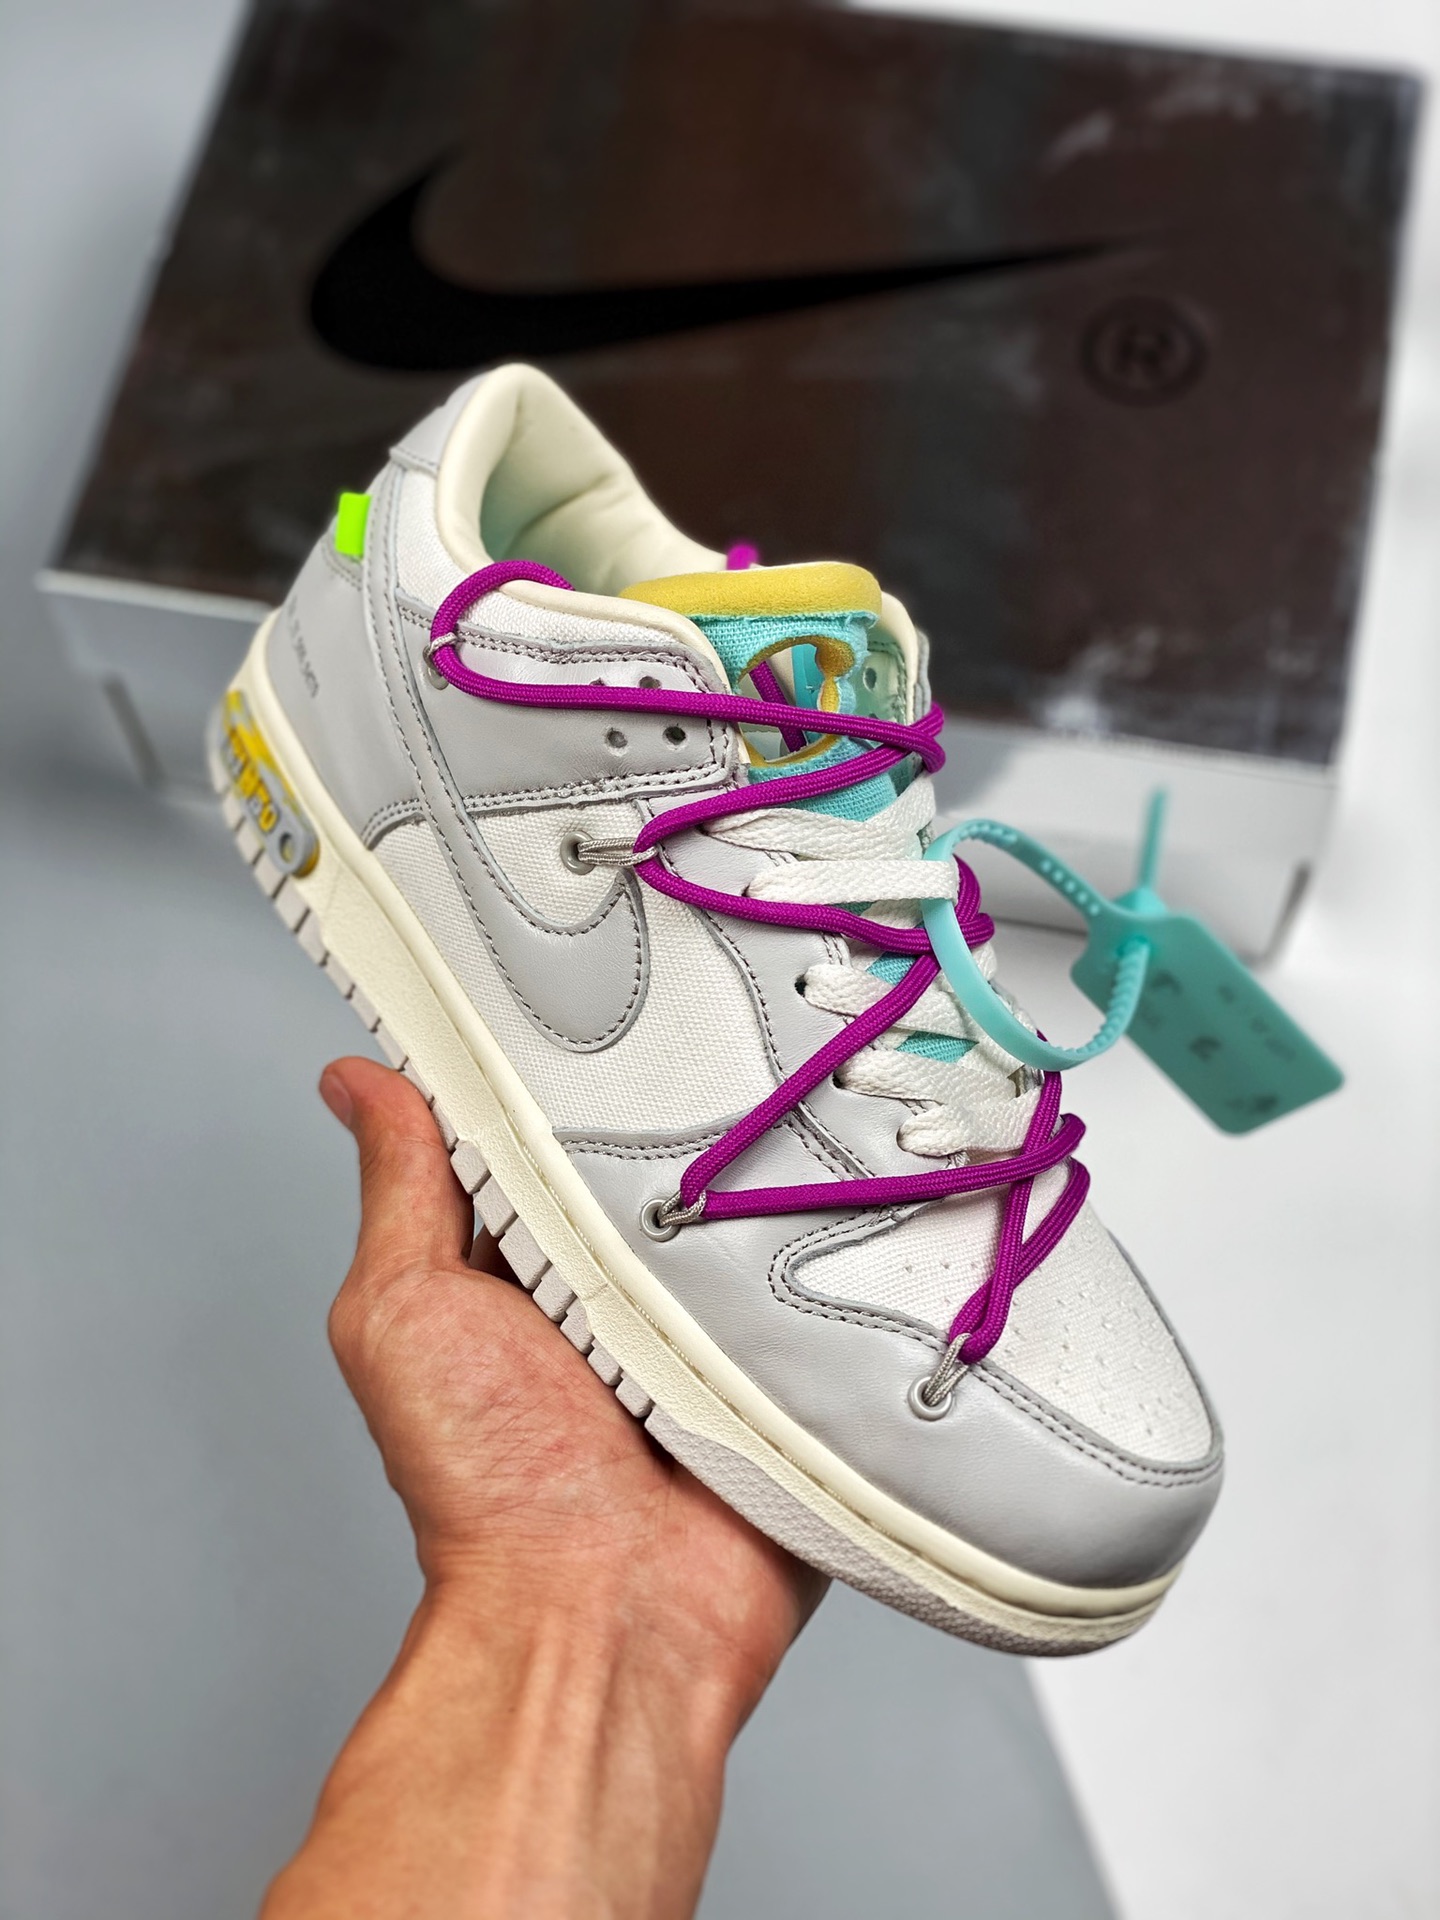 OFF-WHITE x NIKE DUNK LOW 1 OF 50 ”21”